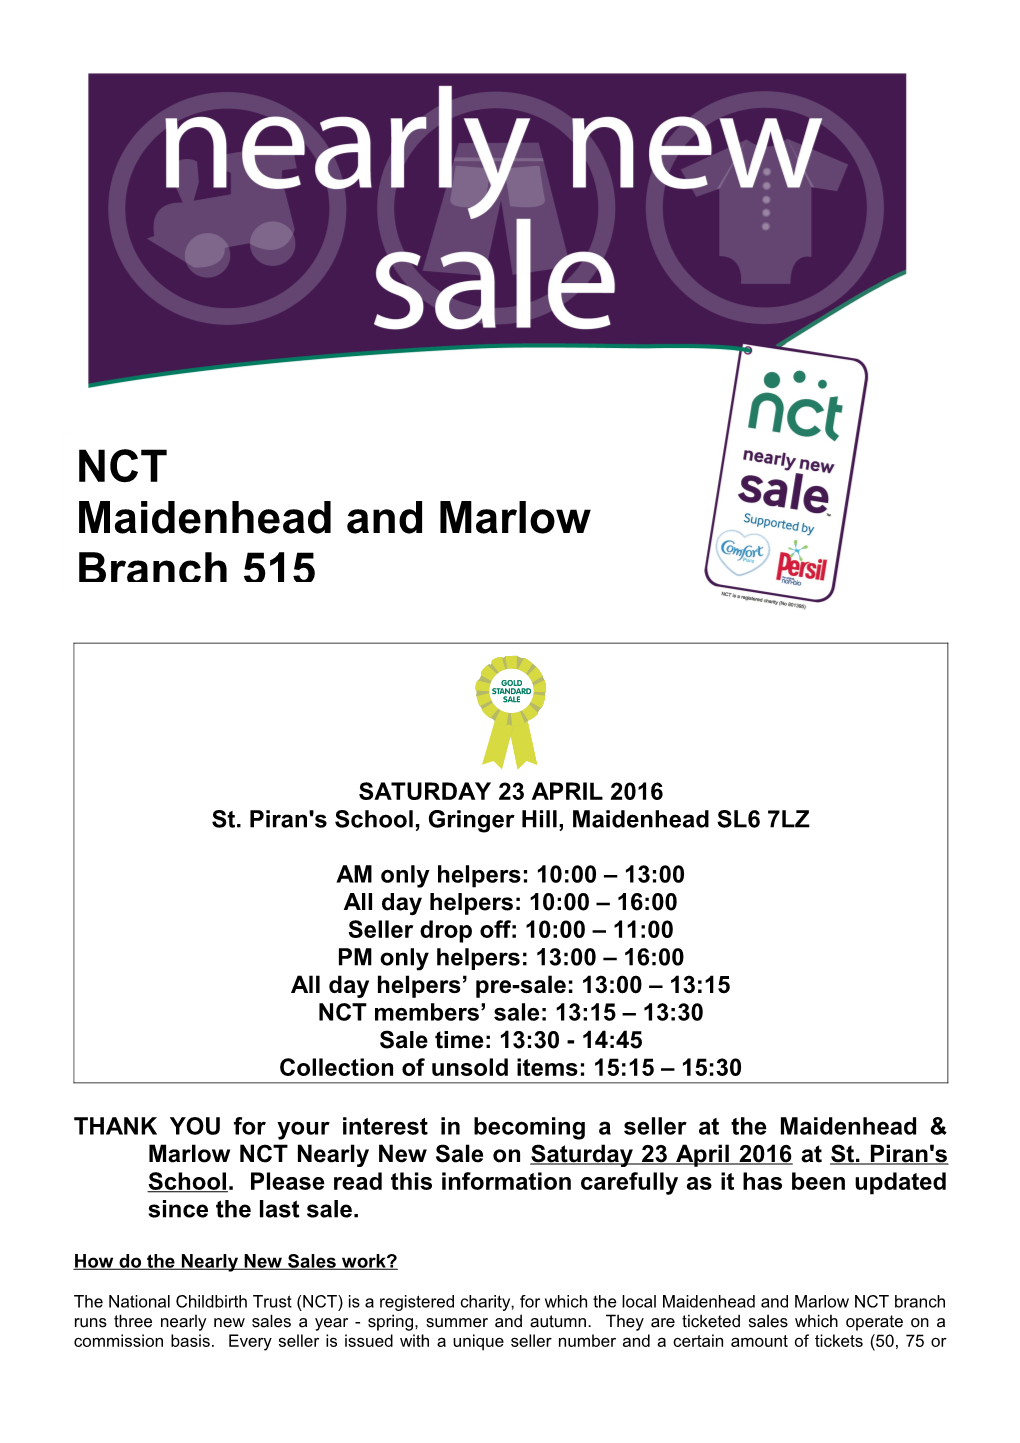 Instructions for Selling at the Maidenhead & Marlow NCT Nearly New Sale